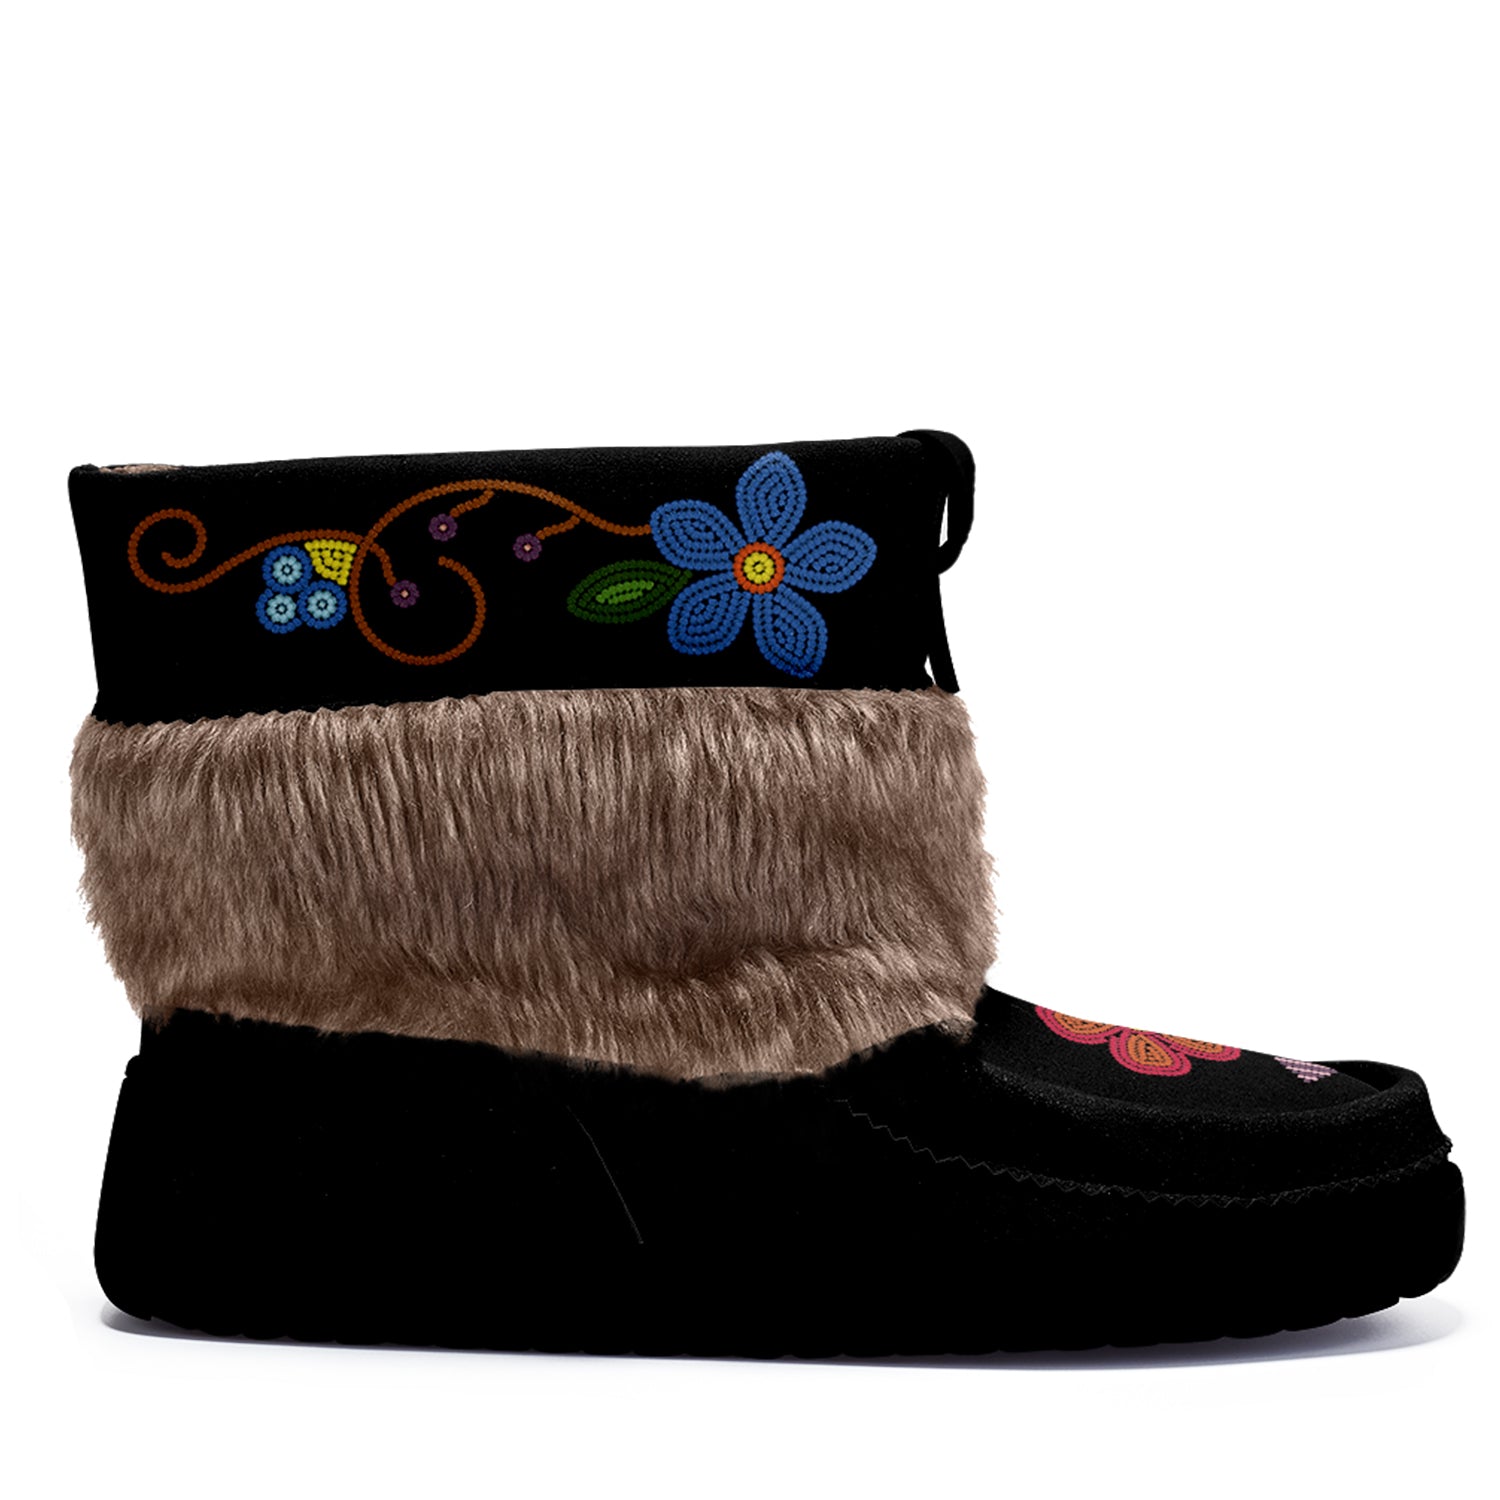 Flower Beadwork People Black Leather MocLux Short Style with Fur